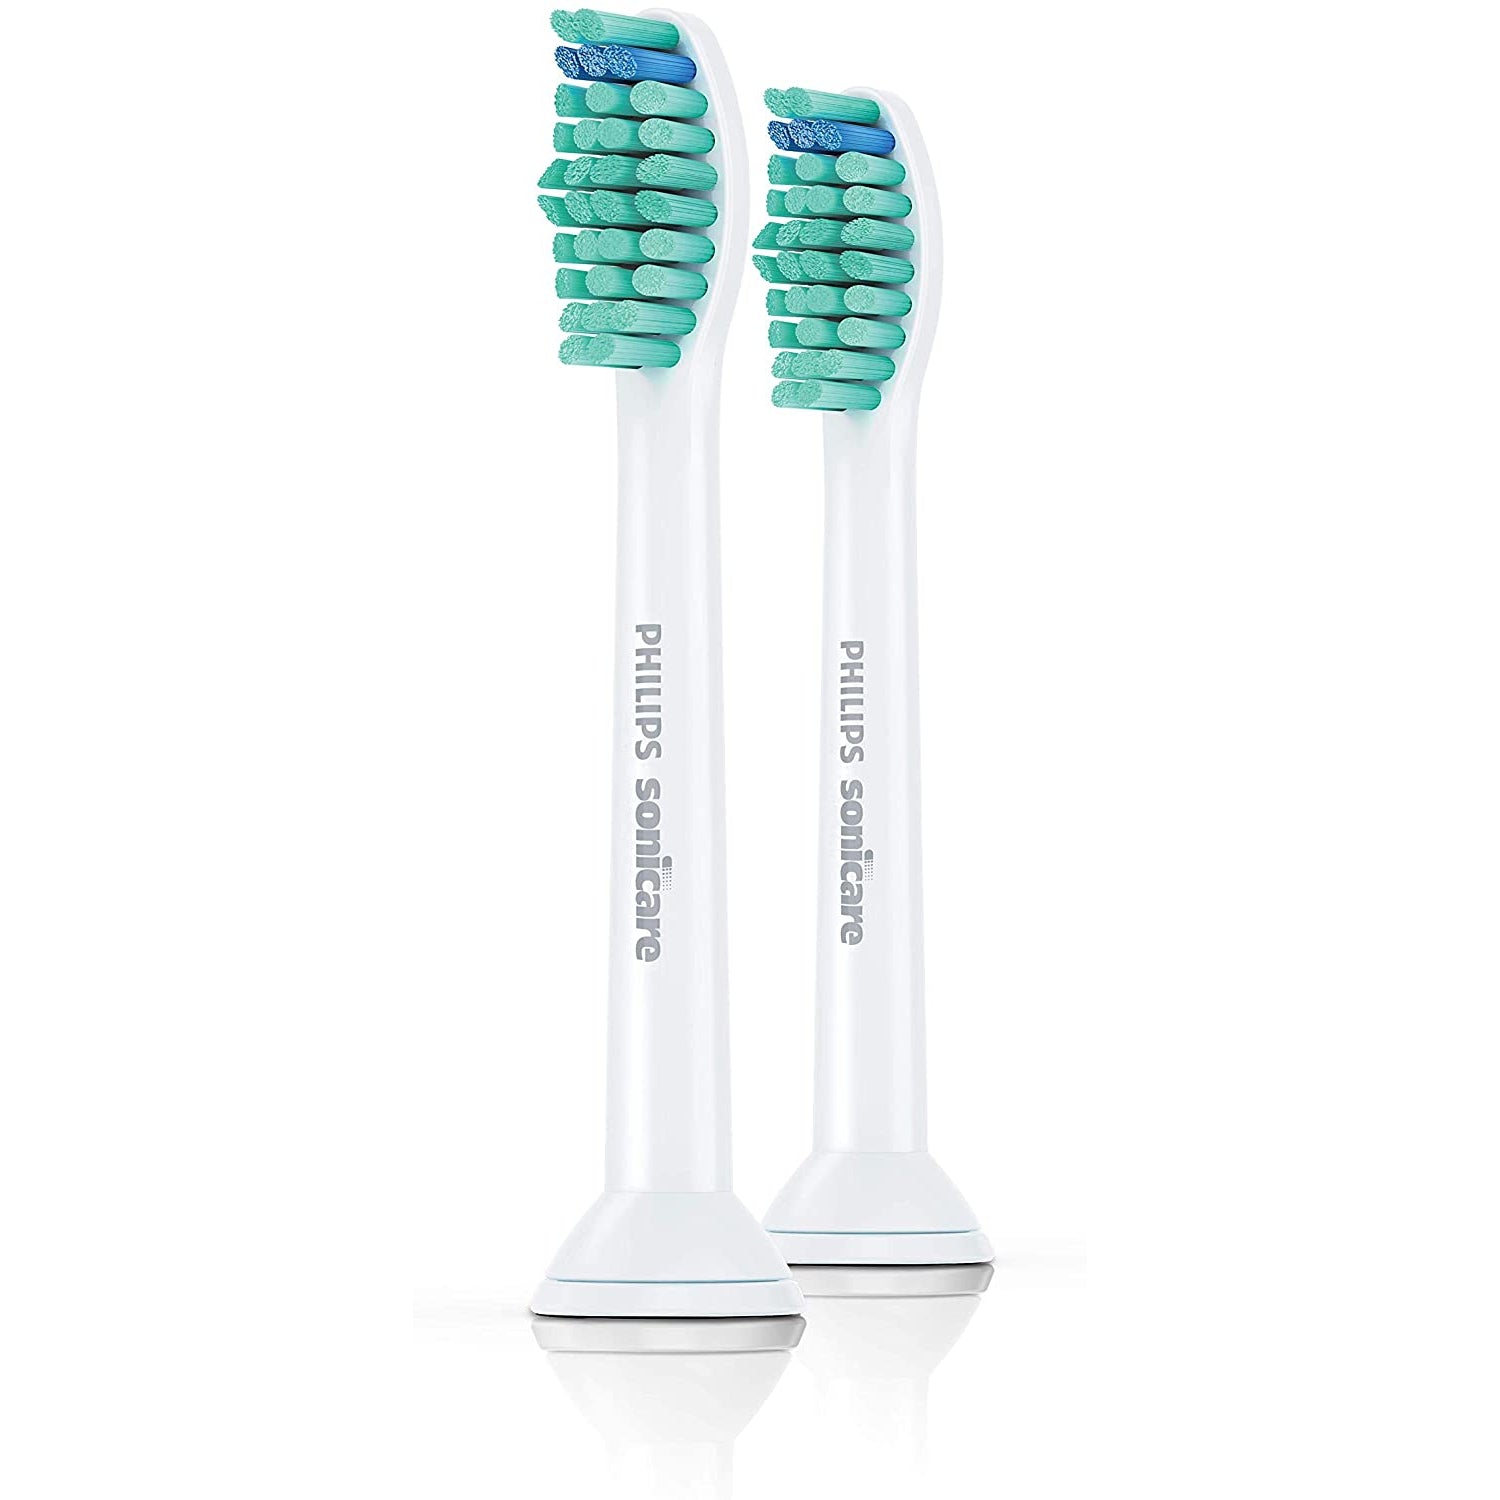 Philips Sonicare ProResults HX6012/07 Original Toothbrush Replacement Brush Heads Standard Pack of 2, White - Healthxpress.ie